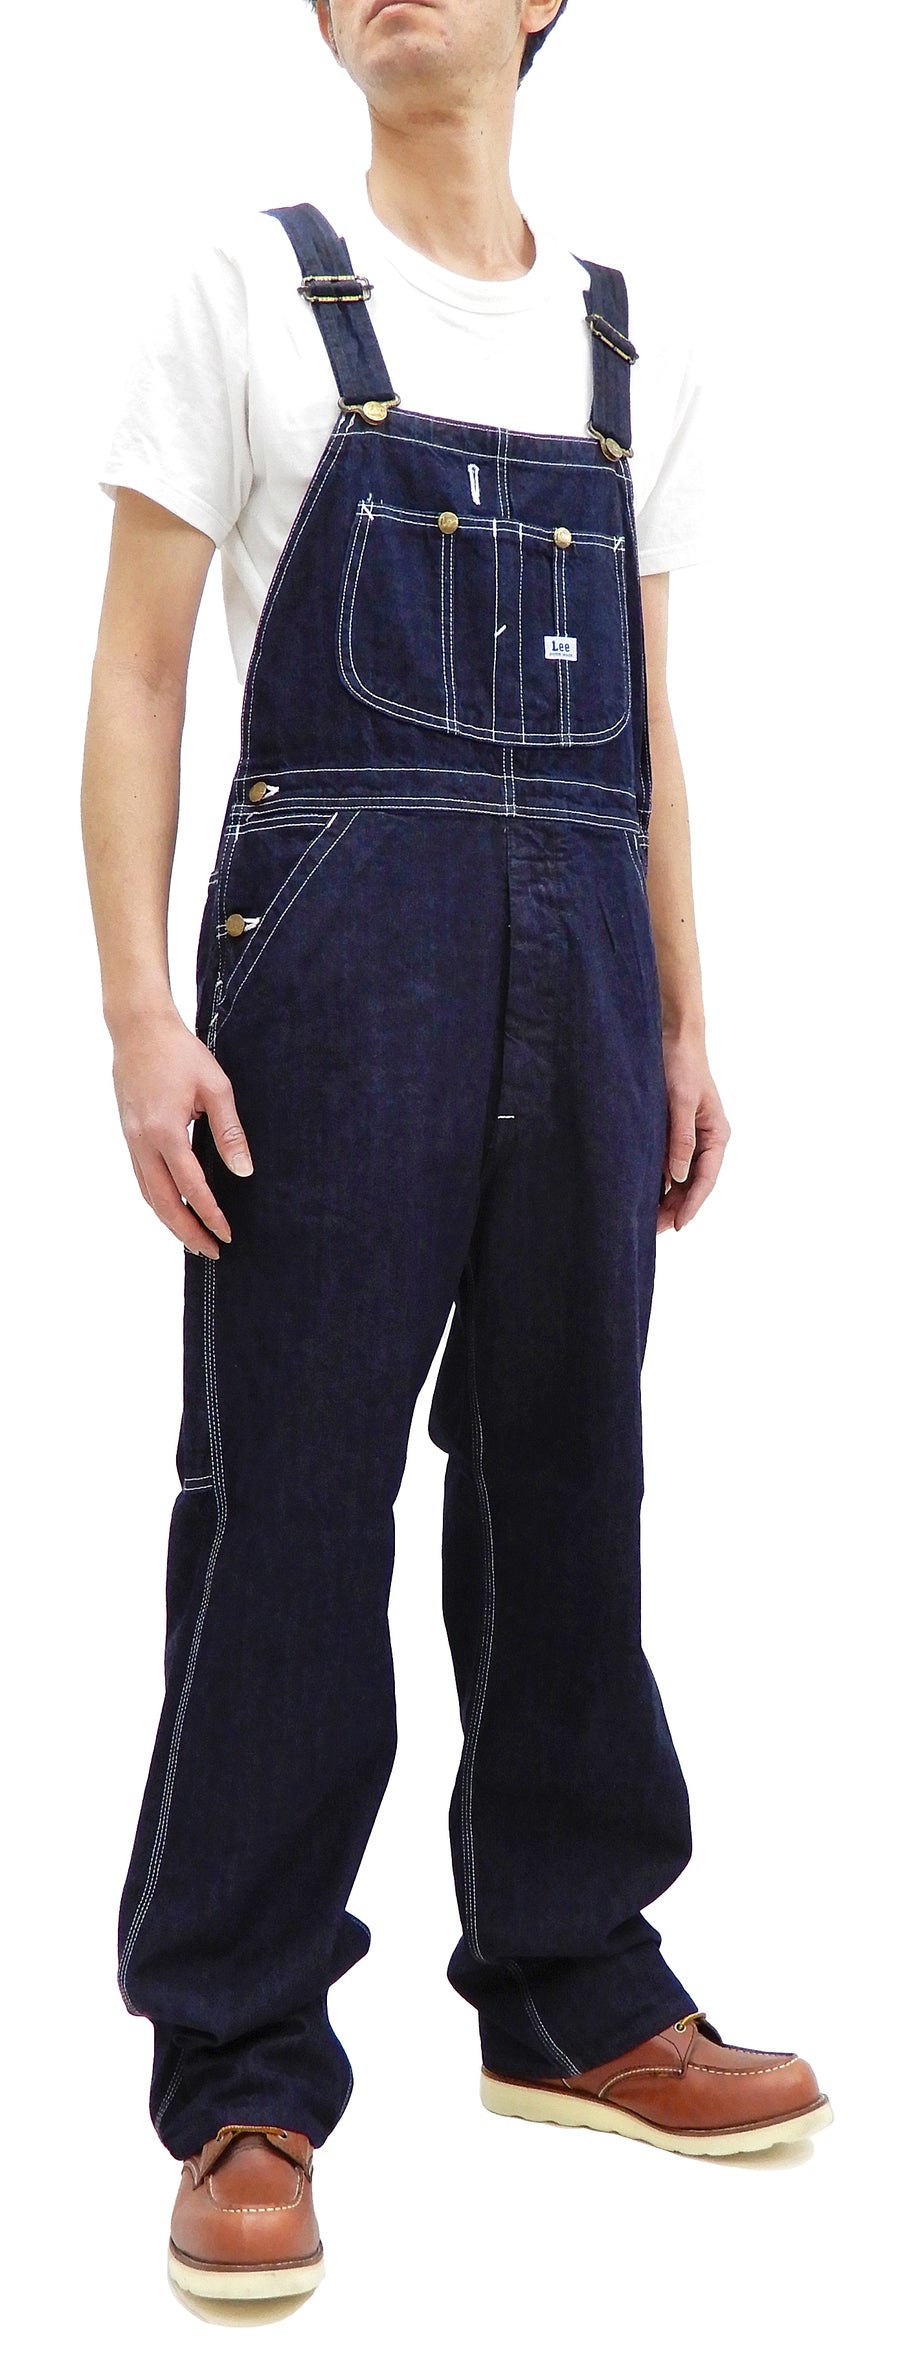 Lee Overalls Men's Casual Fashion Denim Bib Overall High-Back LM7254 LM7254-1100